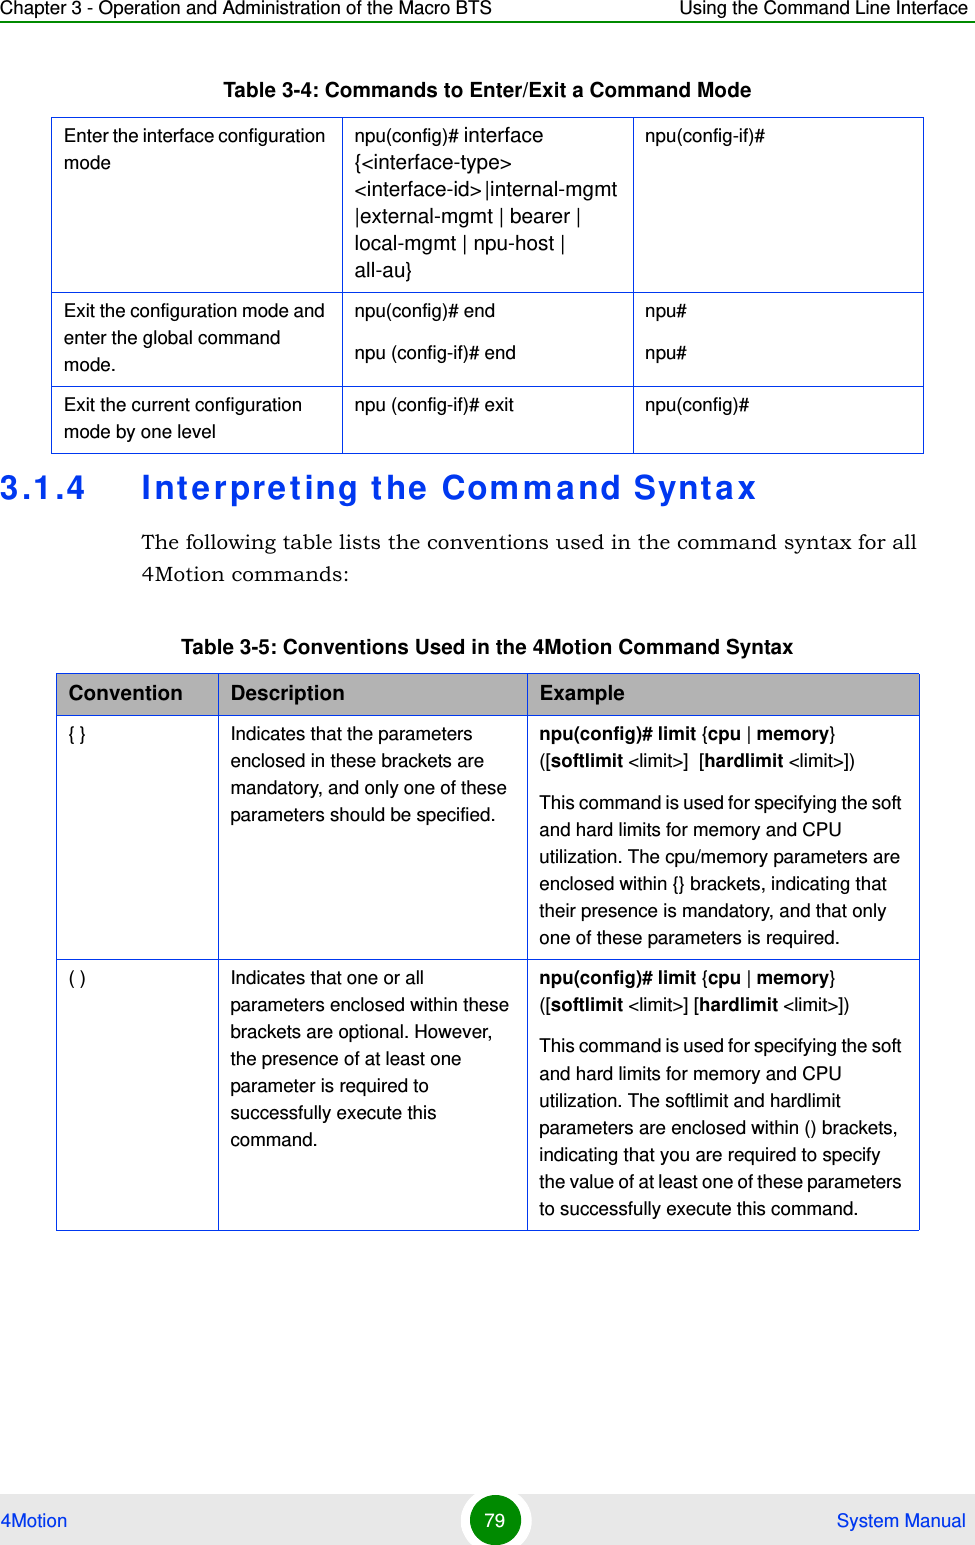 Chapter 3 - Operation and Administration of the Macro BTS Using the Command Line Interface4Motion 79  System Manual3.1.4 Interpreting t he Command SyntaxThe following table lists the conventions used in the command syntax for all 4Motion commands:Enter the interface configuration modenpu(config)# interface {&lt;interface-type&gt; &lt;interface-id&gt; |internal-mgmt |external-mgmt | bearer | local-mgmt | npu-host | all-au}npu(config-if)# Exit the configuration mode and enter the global command mode.npu(config)# endnpu (config-if)# endnpu#npu#Exit the current configuration mode by one levelnpu (config-if)# exit npu(config)#Table 3-5: Conventions Used in the 4Motion Command SyntaxConvention Description Example{ } Indicates that the parameters enclosed in these brackets are mandatory, and only one of these parameters should be specified.npu(config)# limit {cpu | memory} ([softlimit &lt;limit&gt;]  [hardlimit &lt;limit&gt;])This command is used for specifying the soft and hard limits for memory and CPU utilization. The cpu/memory parameters are enclosed within {} brackets, indicating that their presence is mandatory, and that only one of these parameters is required. ( ) Indicates that one or all parameters enclosed within these brackets are optional. However, the presence of at least one parameter is required to successfully execute this command.npu(config)# limit {cpu | memory} ([softlimit &lt;limit&gt;] [hardlimit &lt;limit&gt;])This command is used for specifying the soft and hard limits for memory and CPU utilization. The softlimit and hardlimit parameters are enclosed within () brackets, indicating that you are required to specify the value of at least one of these parameters to successfully execute this command.Table 3-4: Commands to Enter/Exit a Command Mode